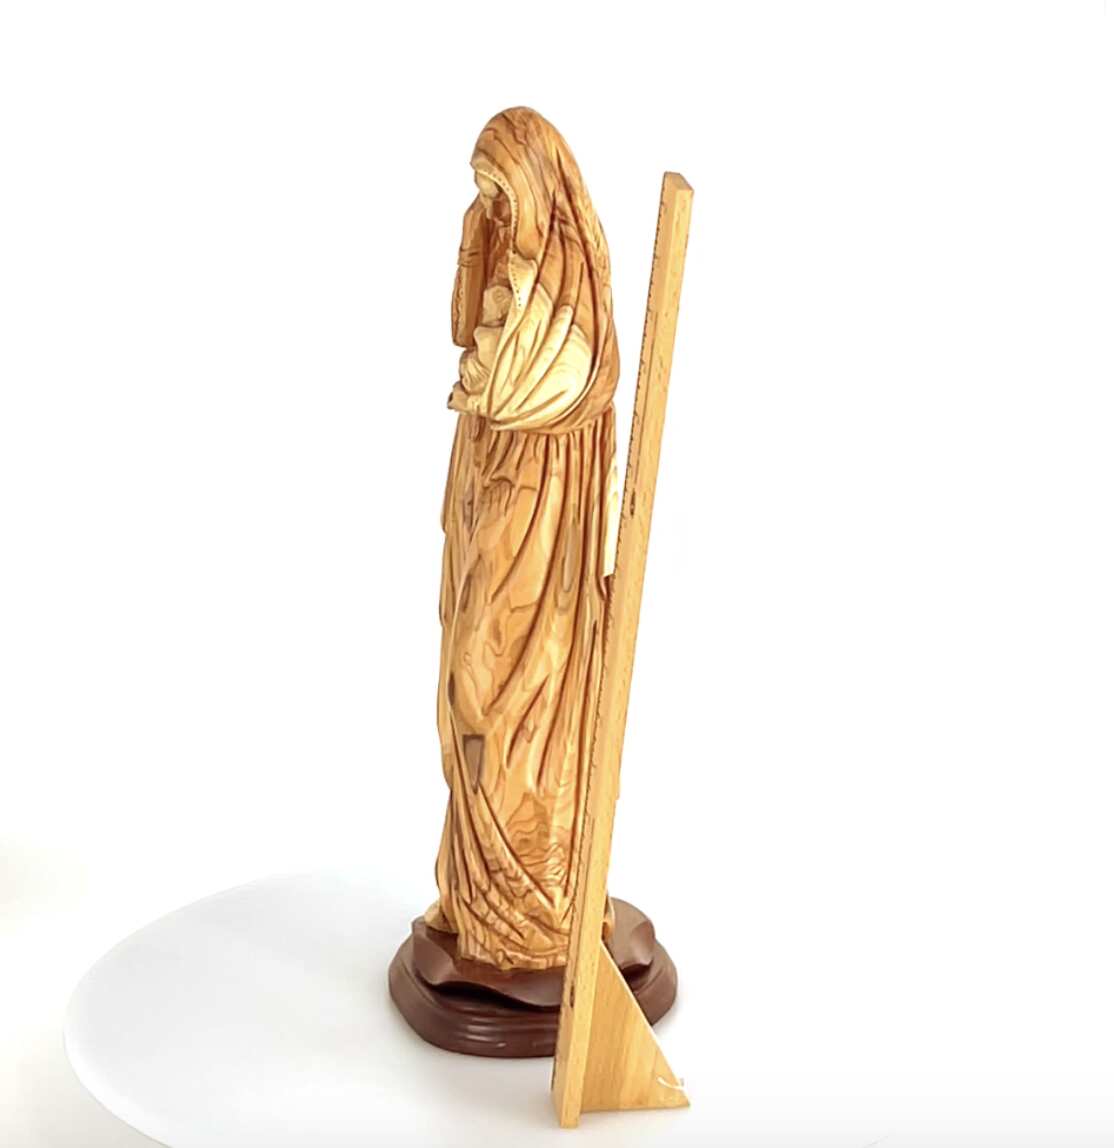 Virgin Mary with Baby Jesus, 19.3" Carved from the Holy Land Olive Wood